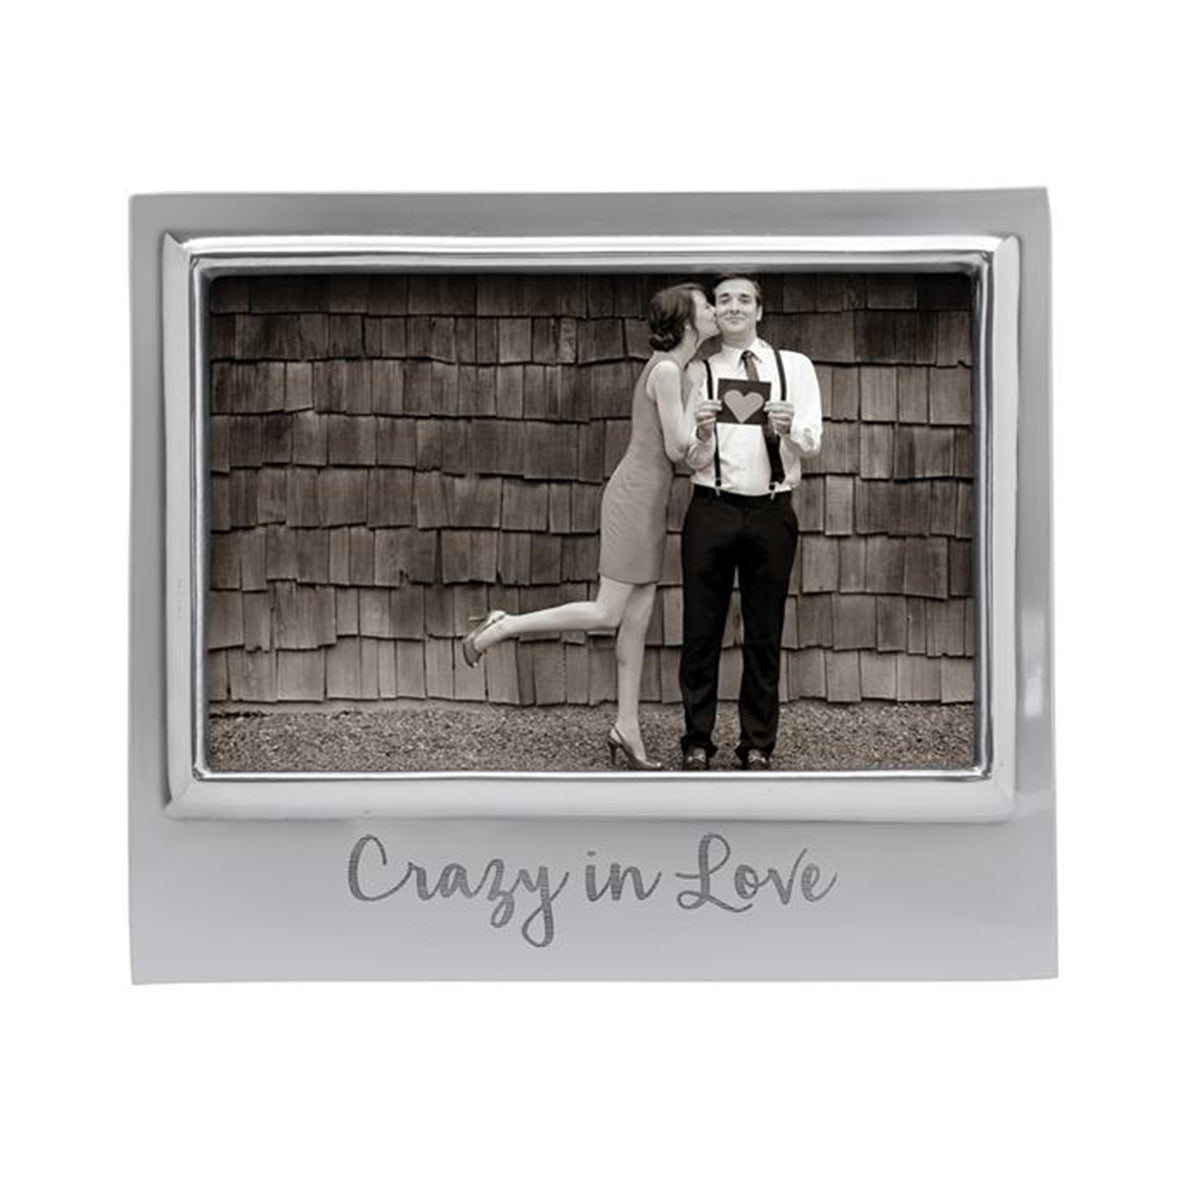 Crazy in Love Frame - All She Wrote